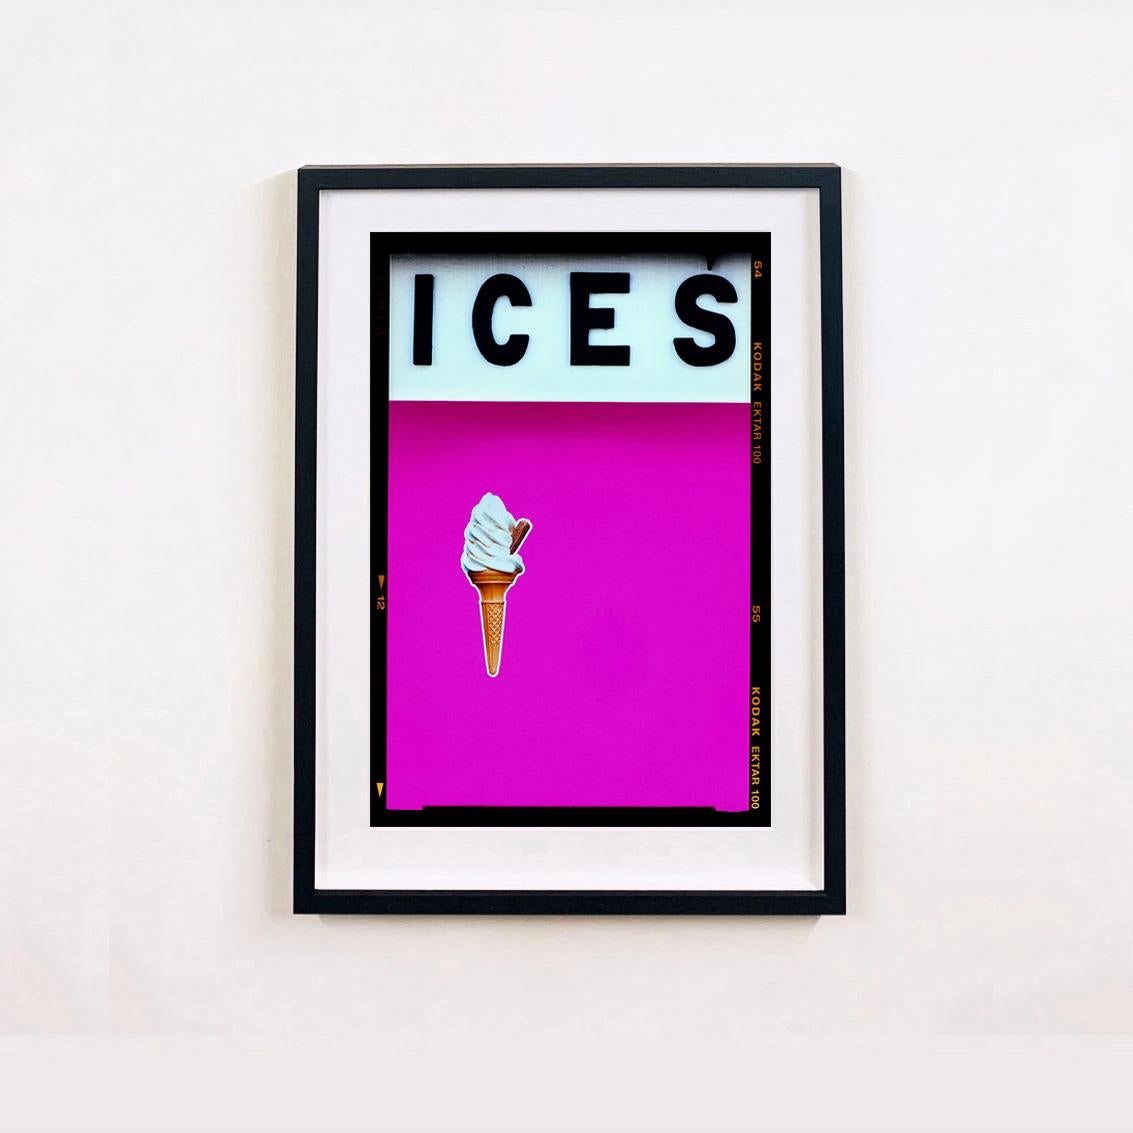 ICES Hues of Rouge- Four Framed Artworks - Pop Art Color Photography For Sale 2